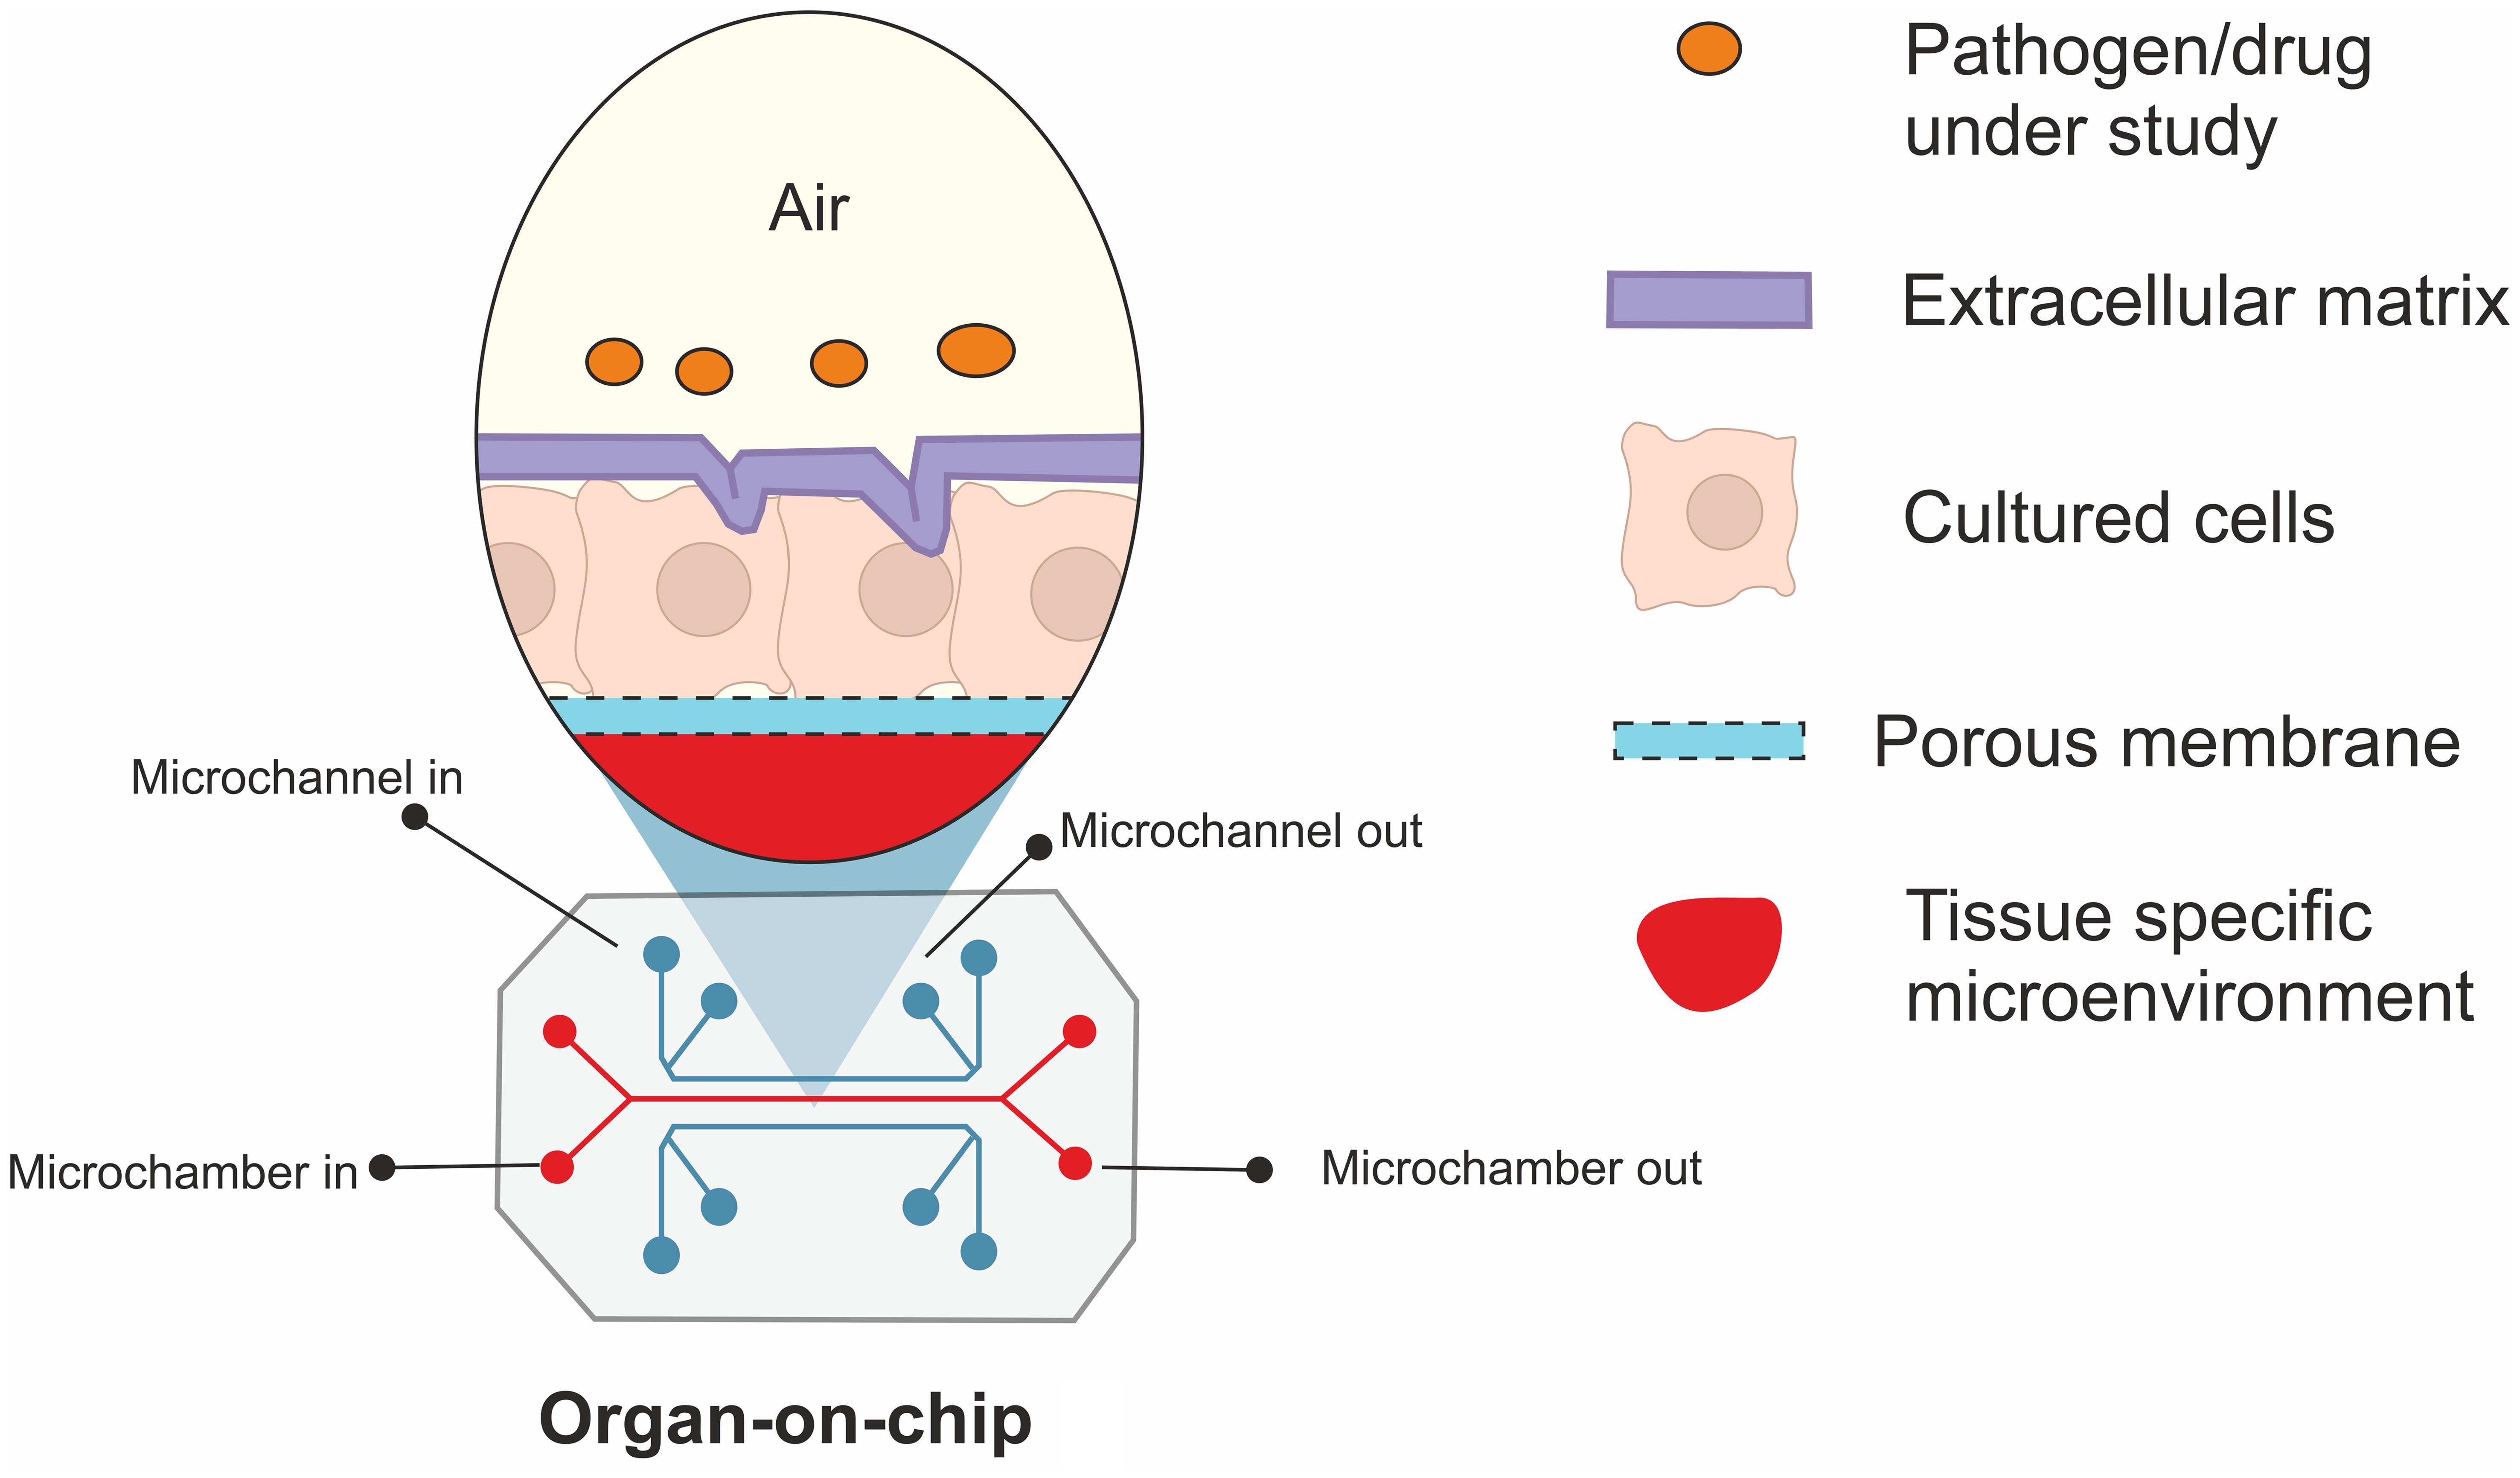 An illustration of organ-on-chip simulating the biological microenvironment.